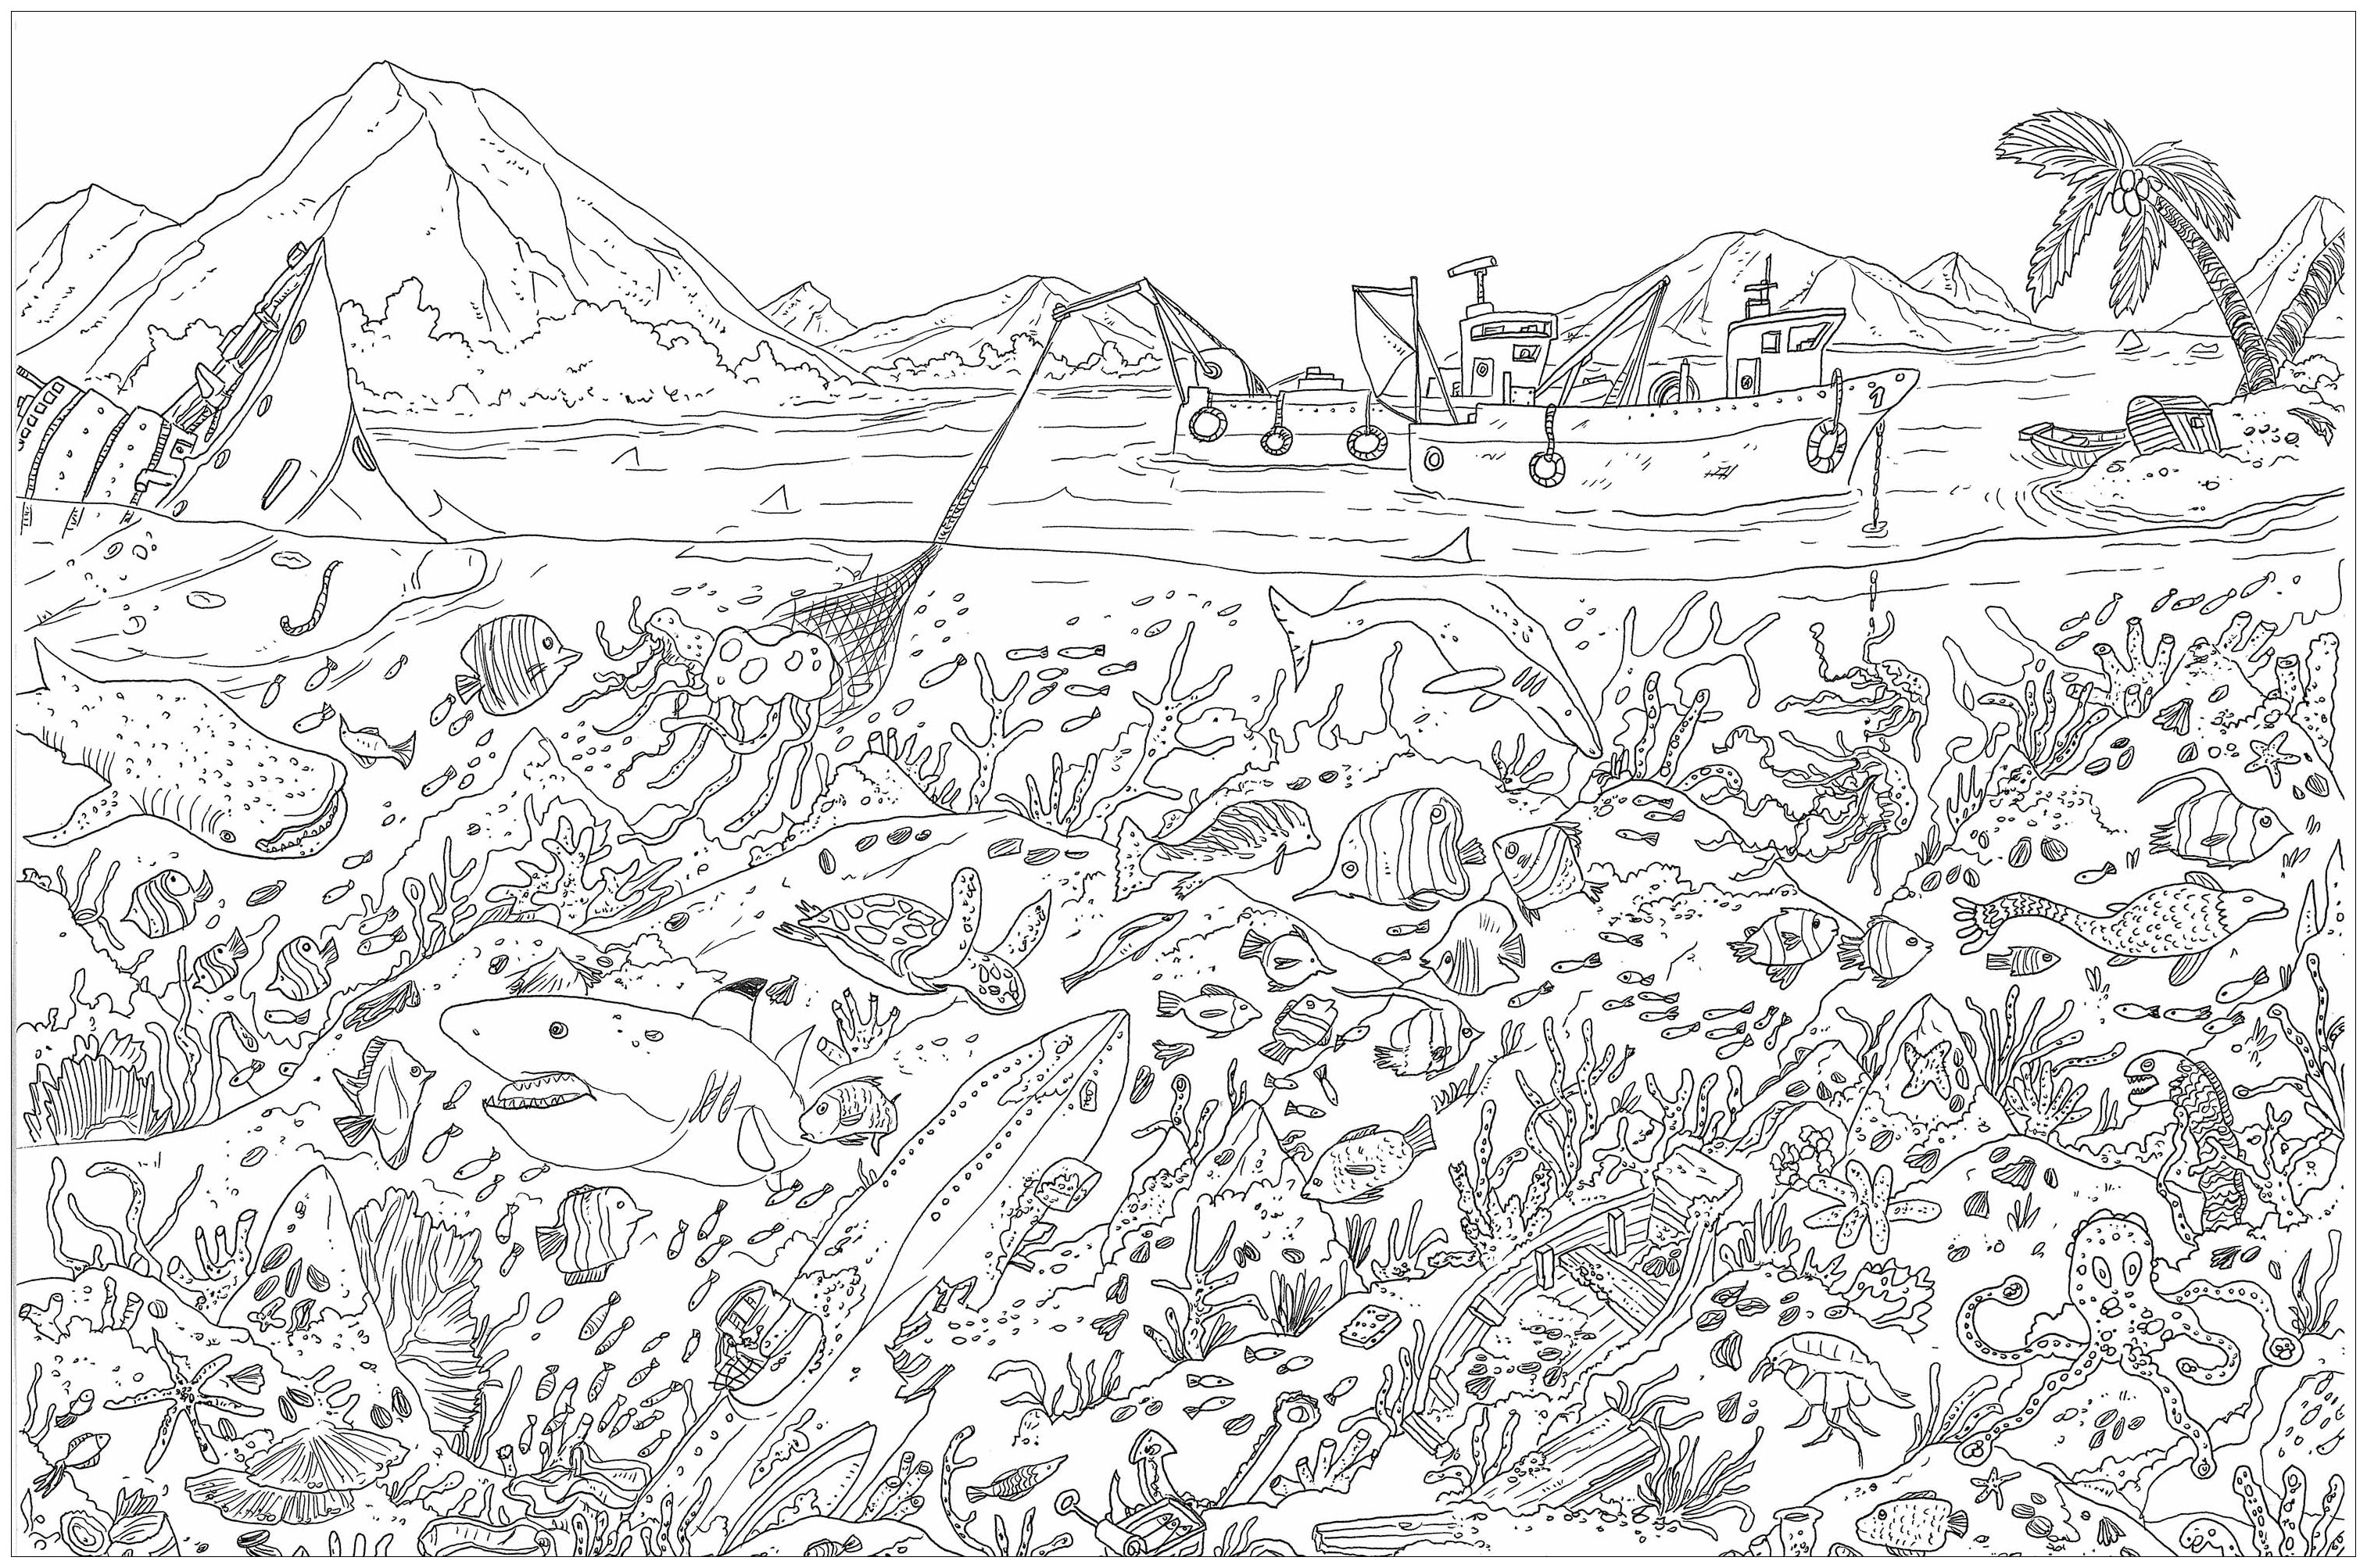 'Sea floor', a complex coloring page, 'Where is Waldo ?' style, Artist : Frédéric Brogard